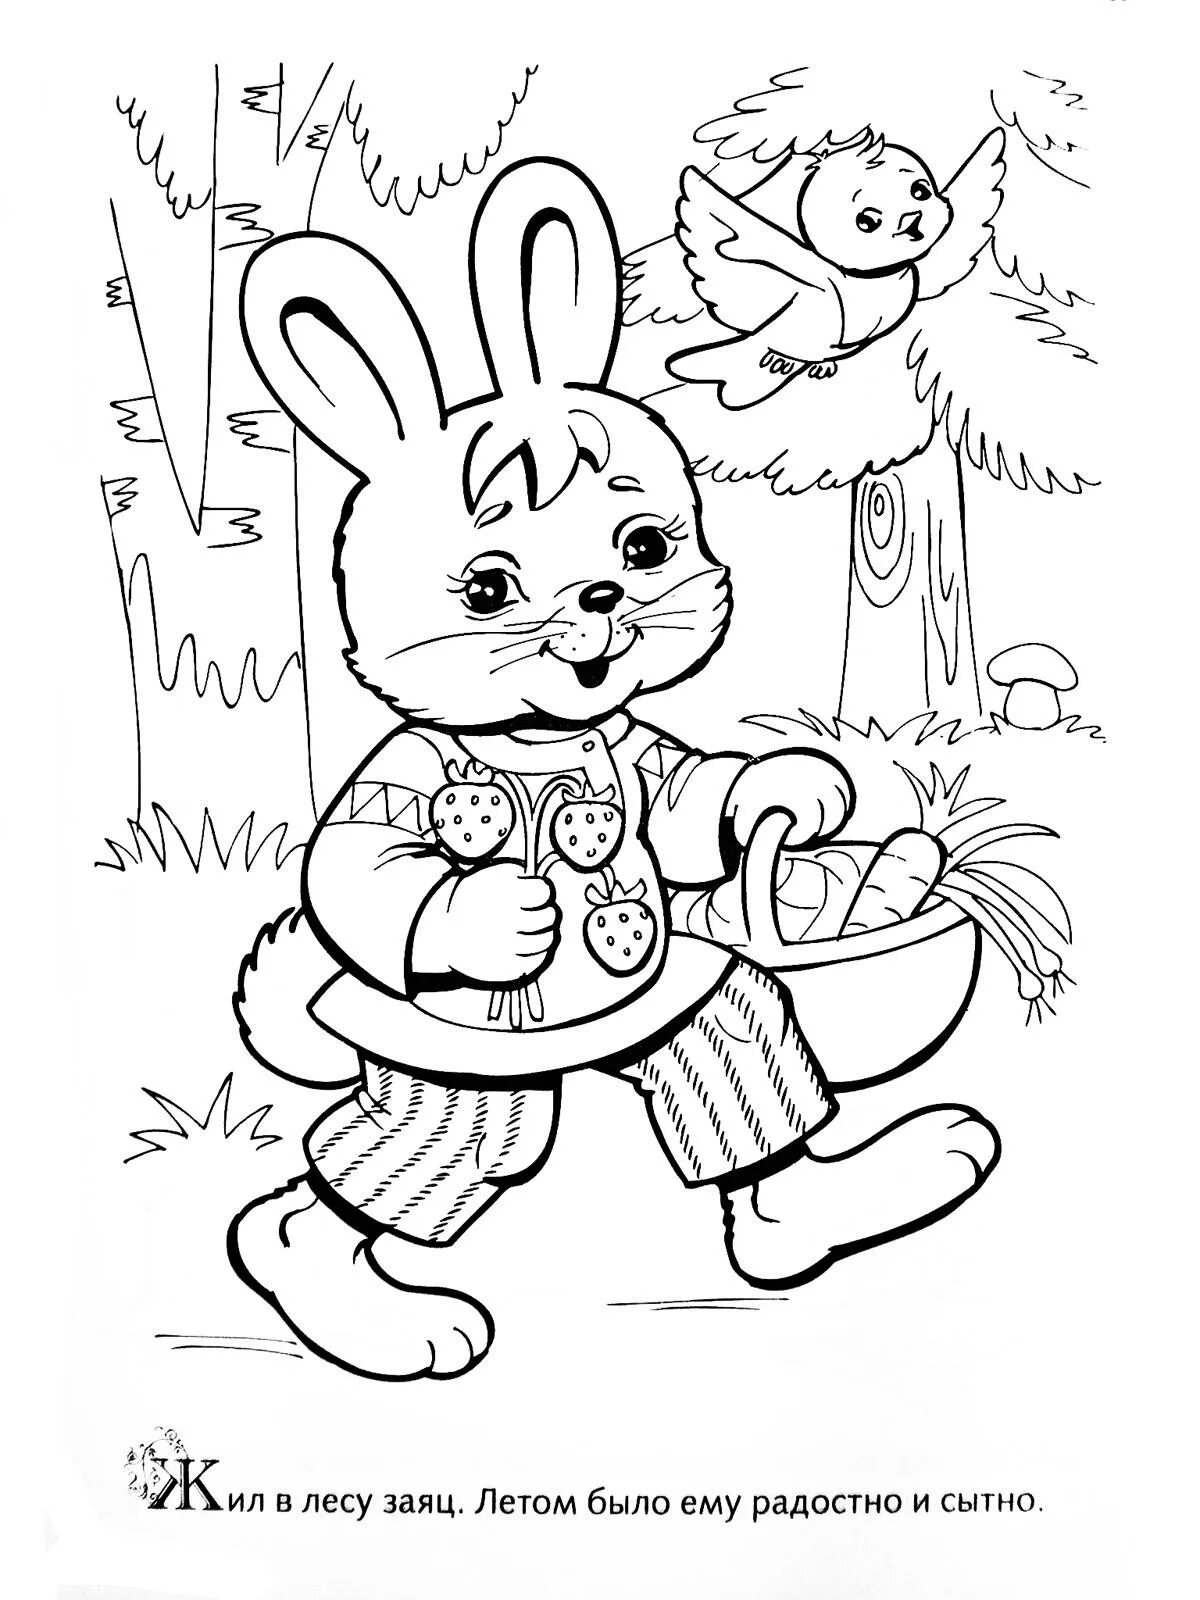 Hare from fairy tale #6